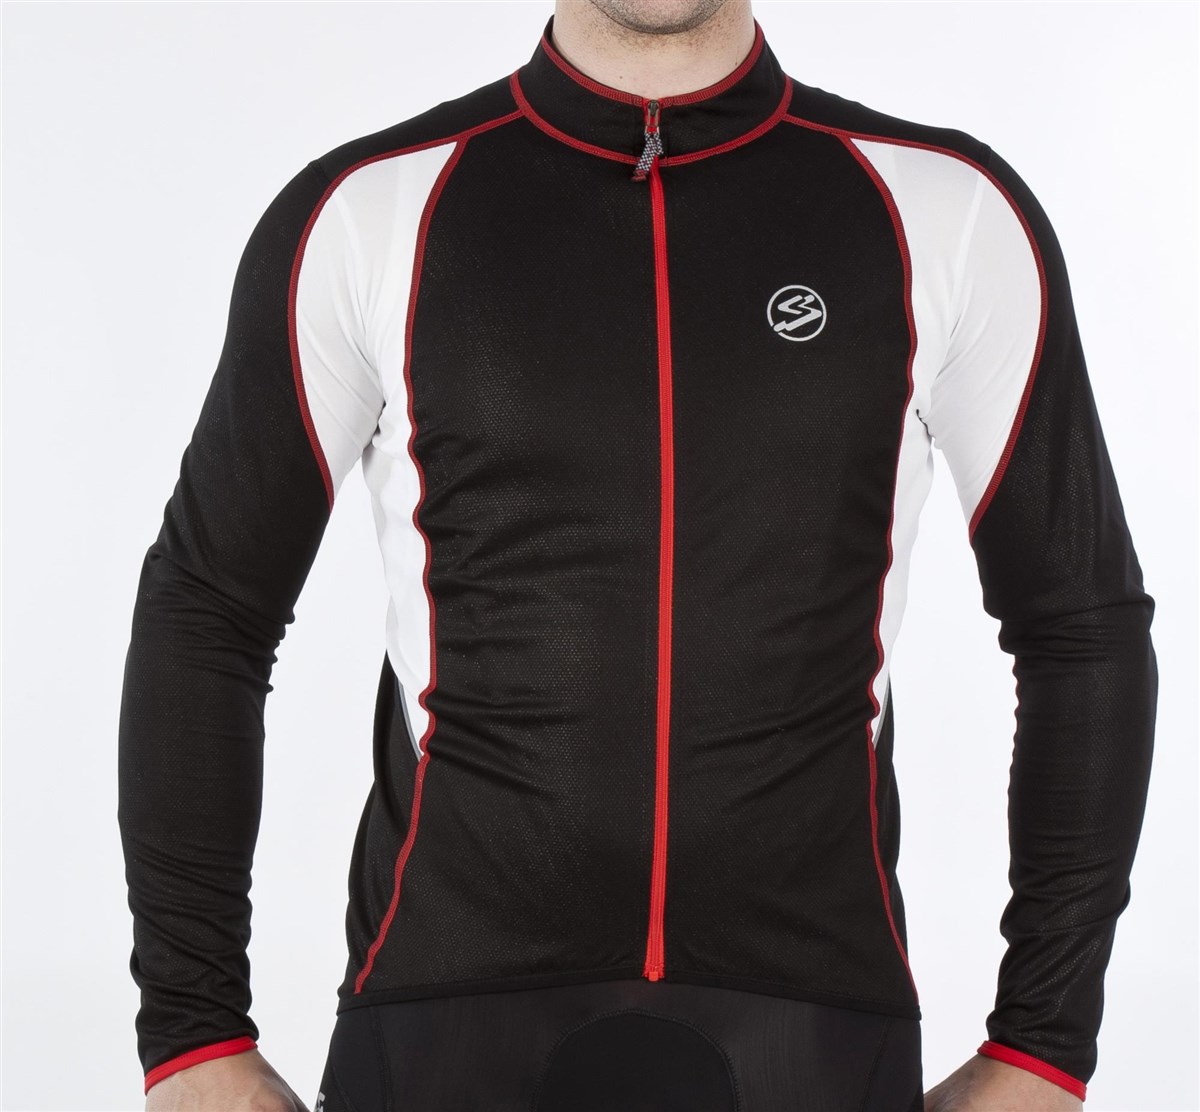 Spiuk Team Mens Summer Light Cycling Jacket product image